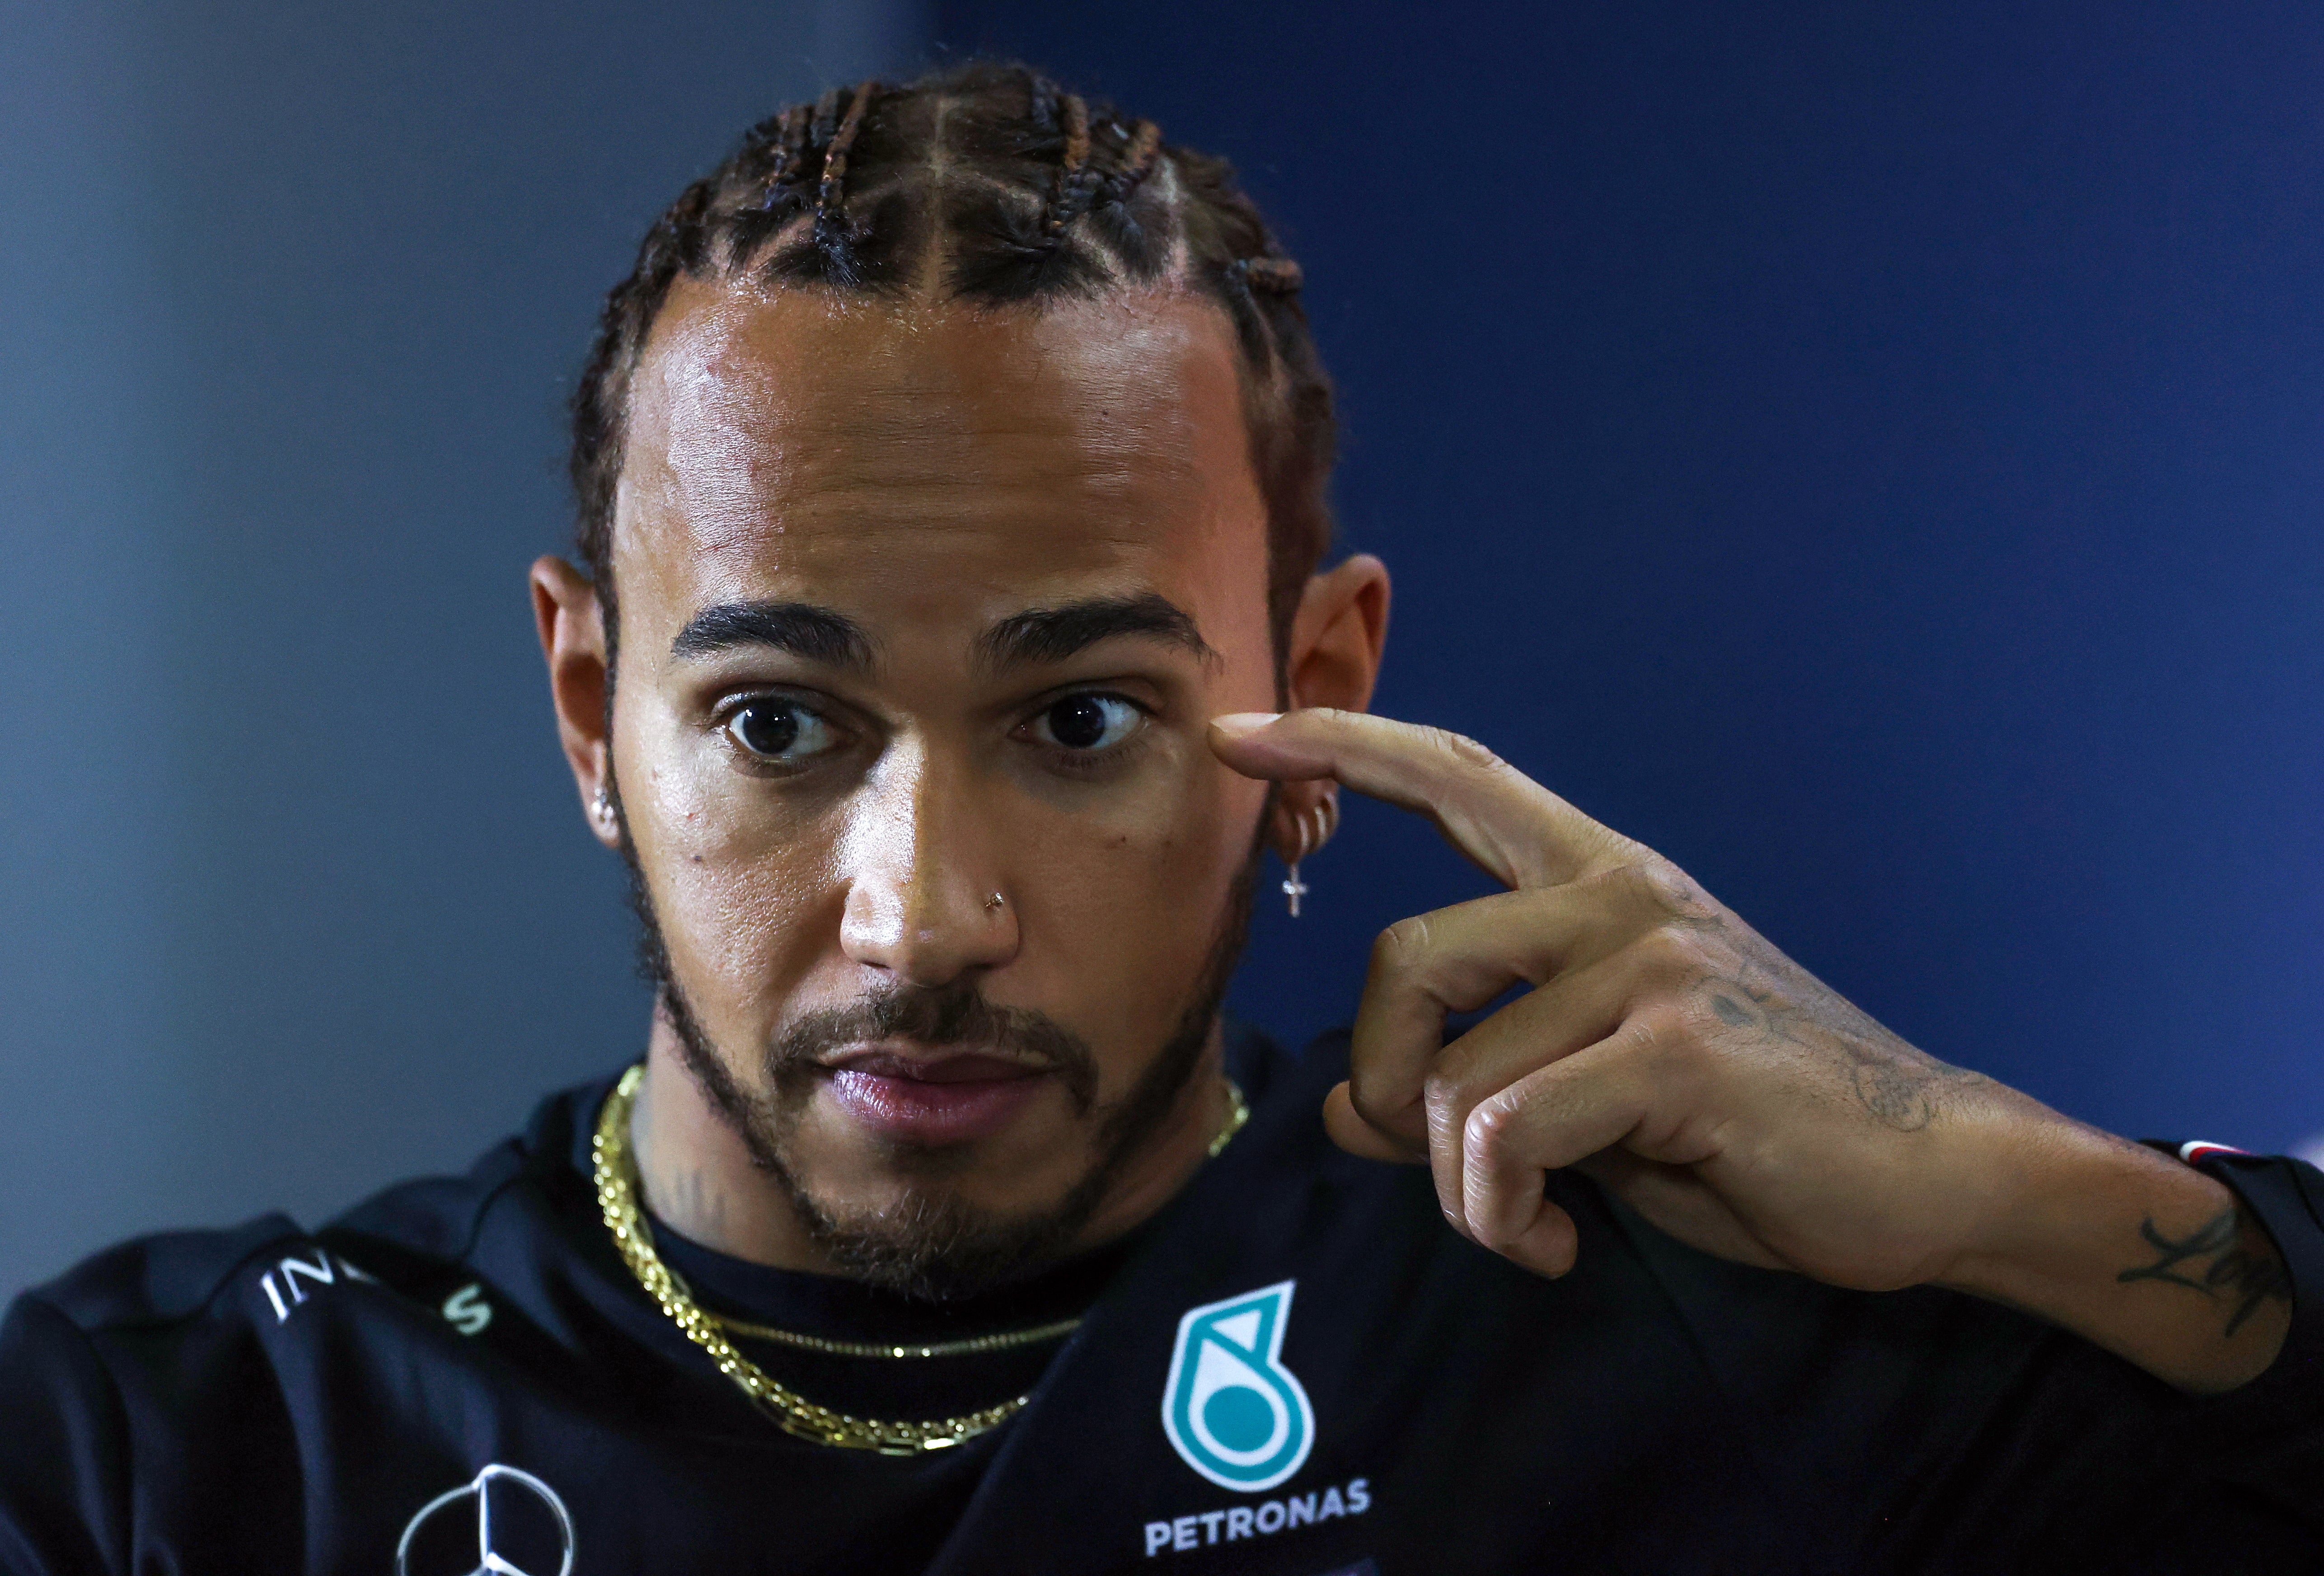 Lewis Hamilton during a press conference